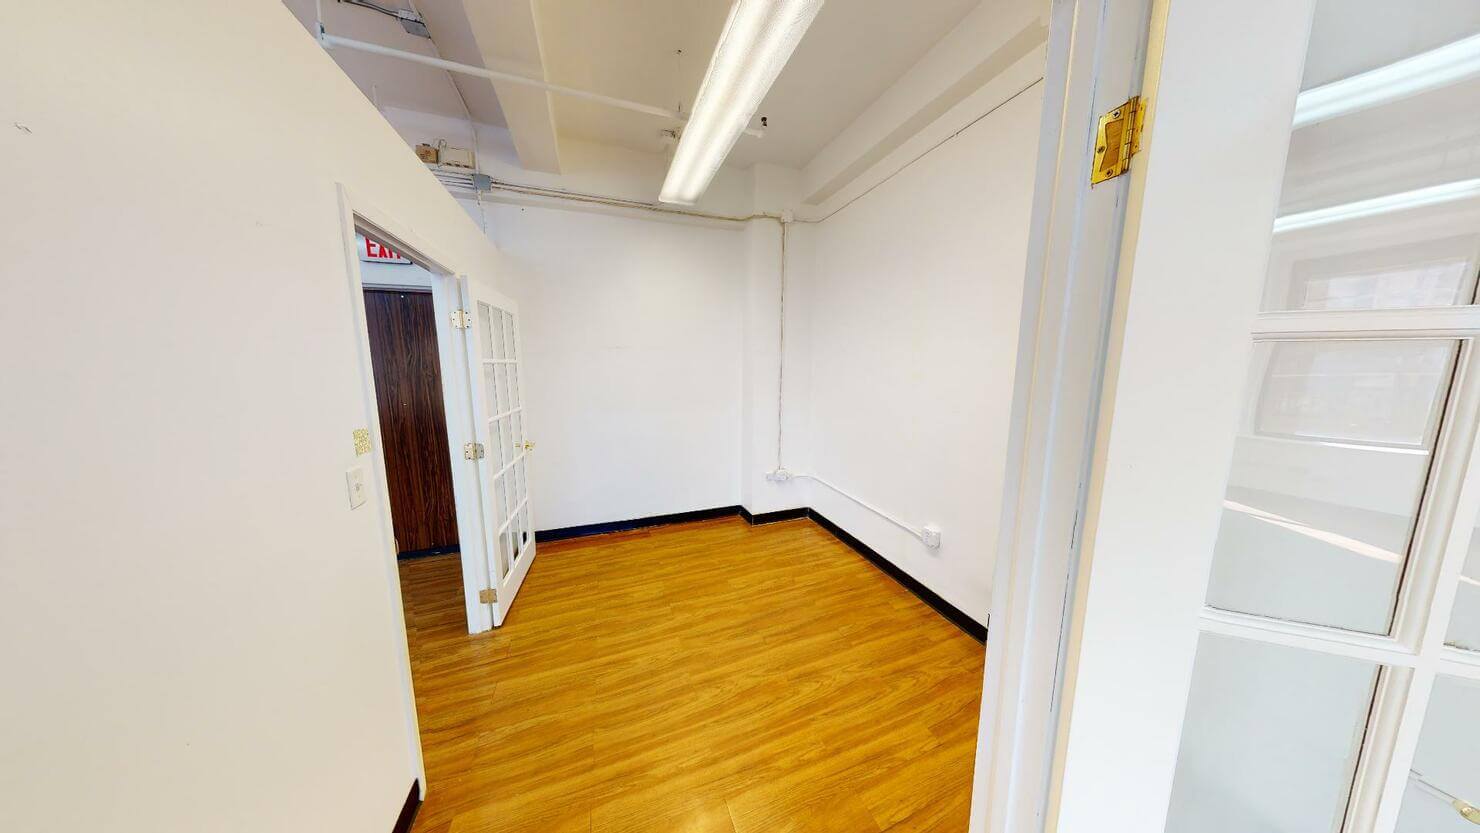 247 West 35th Street Office Space - the Smallest Office Room